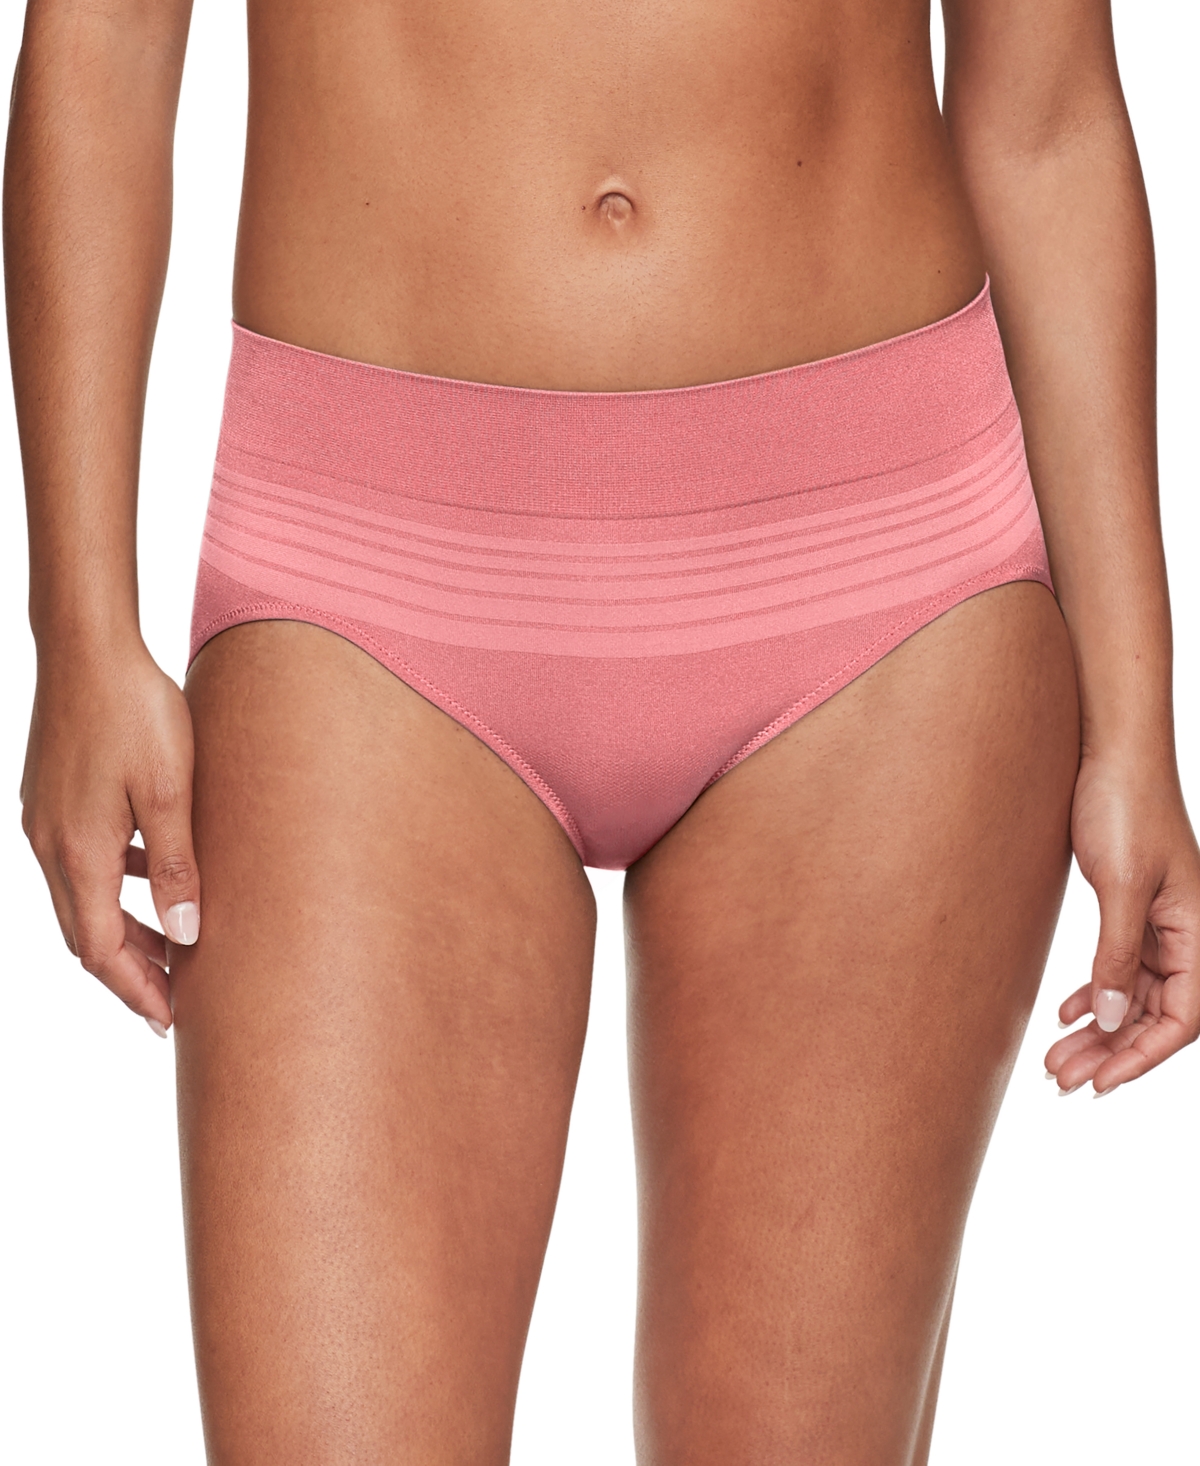 Warner's Warners No Pinching, No Problems Dig-free Comfort Waist Smooth And Seamless Hipster Ru0501p In Mauveglow